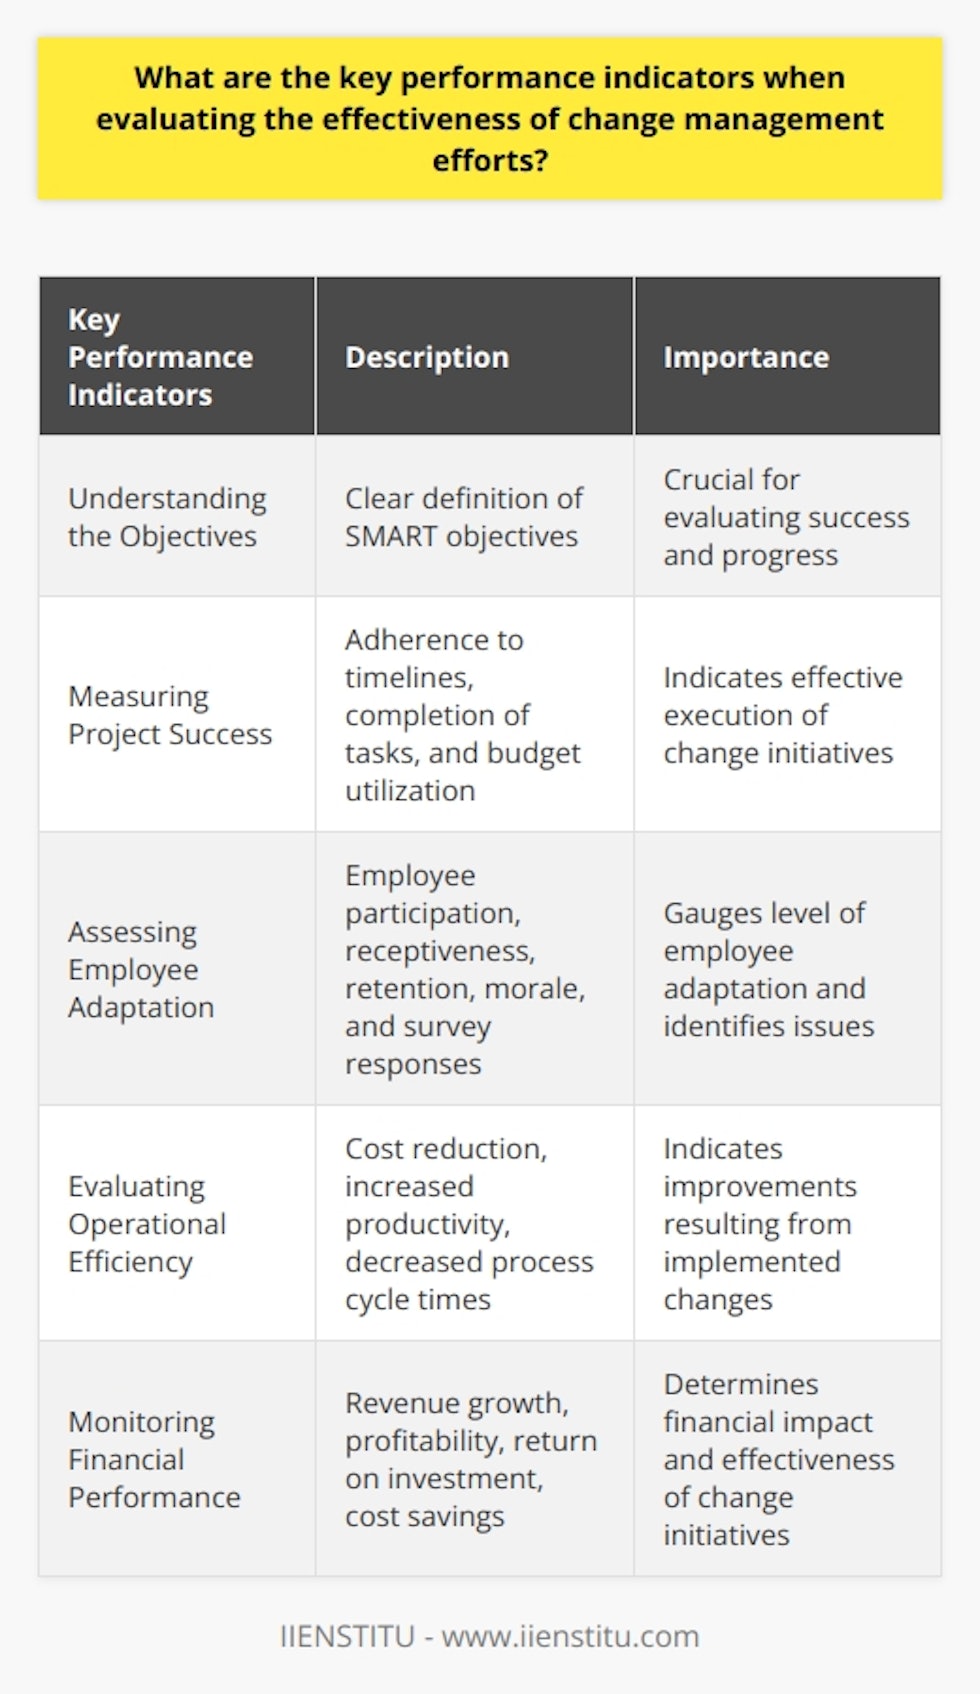 Evaluating the effectiveness of change management efforts is key to understanding the impact of organizational changes and making informed decisions for future initiatives. By utilizing specific key performance indicators (KPIs), organizations can measure and assess the success of their change management endeavors. Here are some key areas to consider when evaluating the effectiveness of change management efforts:1. Understanding the Objectives: To assess the effectiveness of change management efforts, it is crucial to clearly define the objectives of the change initiative. SMART objectives, which are specific, measurable, attainable, relevant, and time-bound, provide a framework for evaluating success and progress.2. Measuring Project Success: Change management often involves the implementation of projects, such as new organizational structures or processes. The success of these projects can be measured using KPIs such as adherence to timelines, completion of tasks within the set timeframe, and percentage of budget used. These indicators provide insight into the effective execution of change initiatives.3. Assessing Employee Adaptation: Employee adaptation is a critical aspect of change management. KPIs such as employee participation in change initiatives, receptiveness to new functions, retention rates, staff morale, and survey responses can help gauge the level of employee adaptation. These indicators provide valuable insights into how well employees are adjusting to the changes and identify any issues they may be facing during the adaptation process.4. Evaluating Operational Efficiency: The effectiveness of change management efforts can be measured by evaluating operational efficiency. KPIs like cost reduction, increased productivity, and decreased process cycle times can indicate whether the implemented changes have delivered the desired improvements. Customer satisfaction levels and the organization's ability to meet and exceed customer expectations consistently are also important indicators of the effectiveness of change management initiatives.5. Monitoring Financial Performance: Finally, financial performance is a critical KPI when evaluating the success of change management efforts. Factors such as revenue growth, profitability, return on investment, and cost savings linked to the changes implemented can provide a clear picture of the financial impact of the change initiatives. These indicators help organizations determine whether their change management strategies have resulted in tangible financial improvements, demonstrating overall effectiveness.By utilizing these key performance indicators, organizations can evaluate the effectiveness of their change management efforts thoroughly. These indicators provide valuable insights into the impact of changes on various aspects of the organization, enabling informed decision-making and continuous improvement in change management strategies.